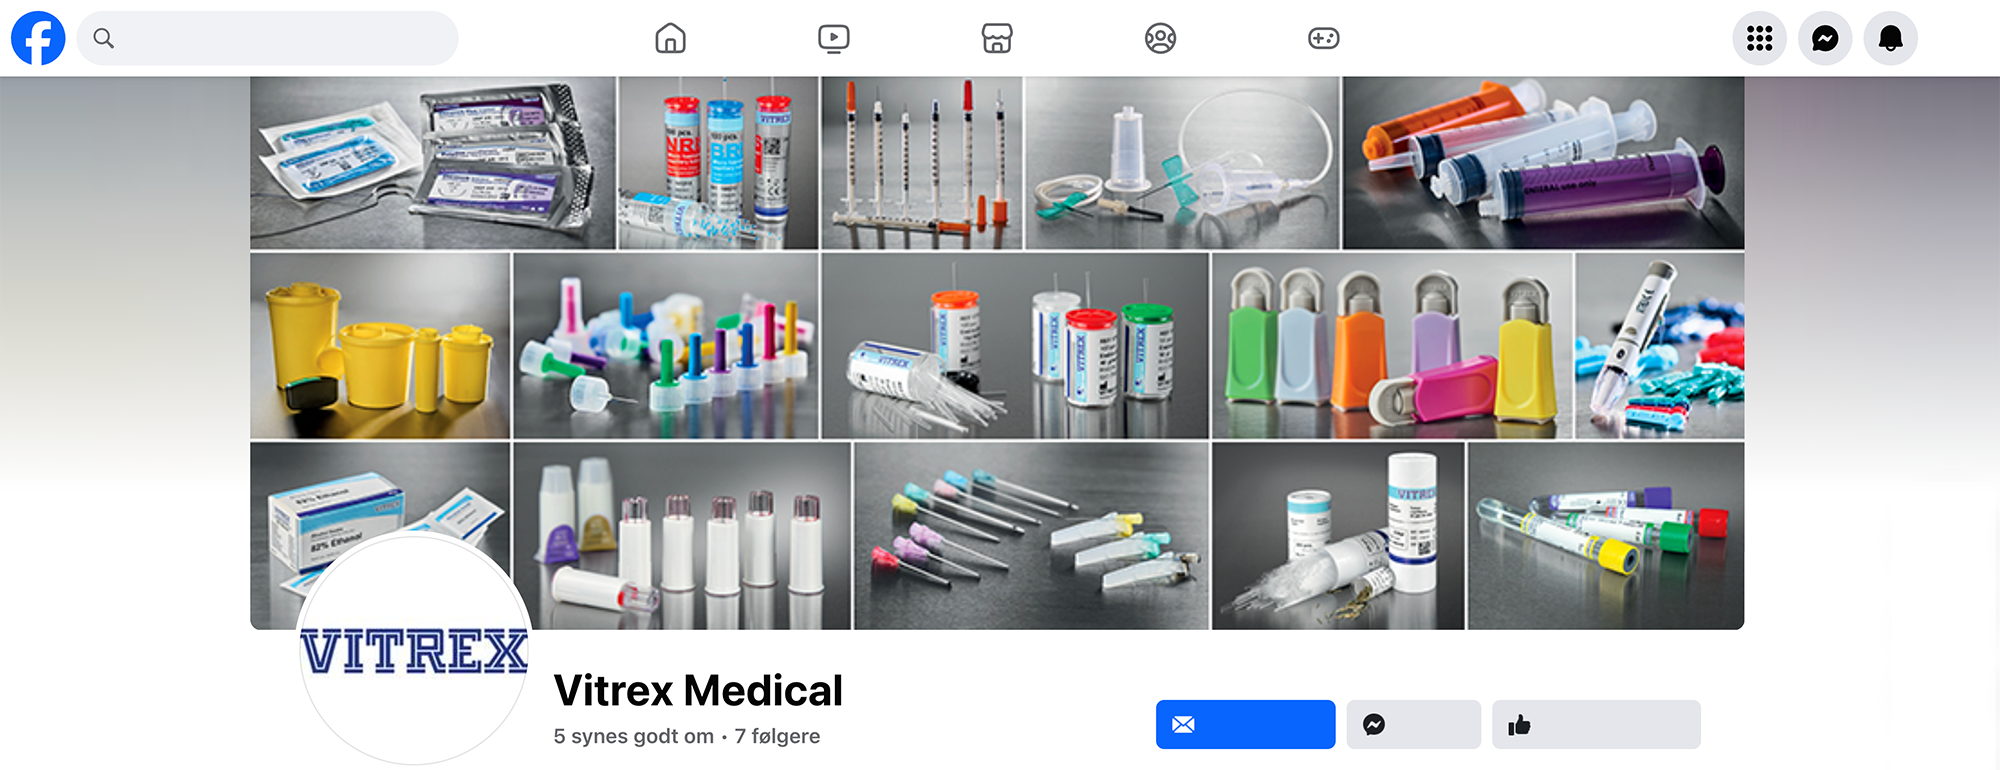 Vitrex facebook home image showing capillary tubes and other exciting product news from Vitrex Medical A/S